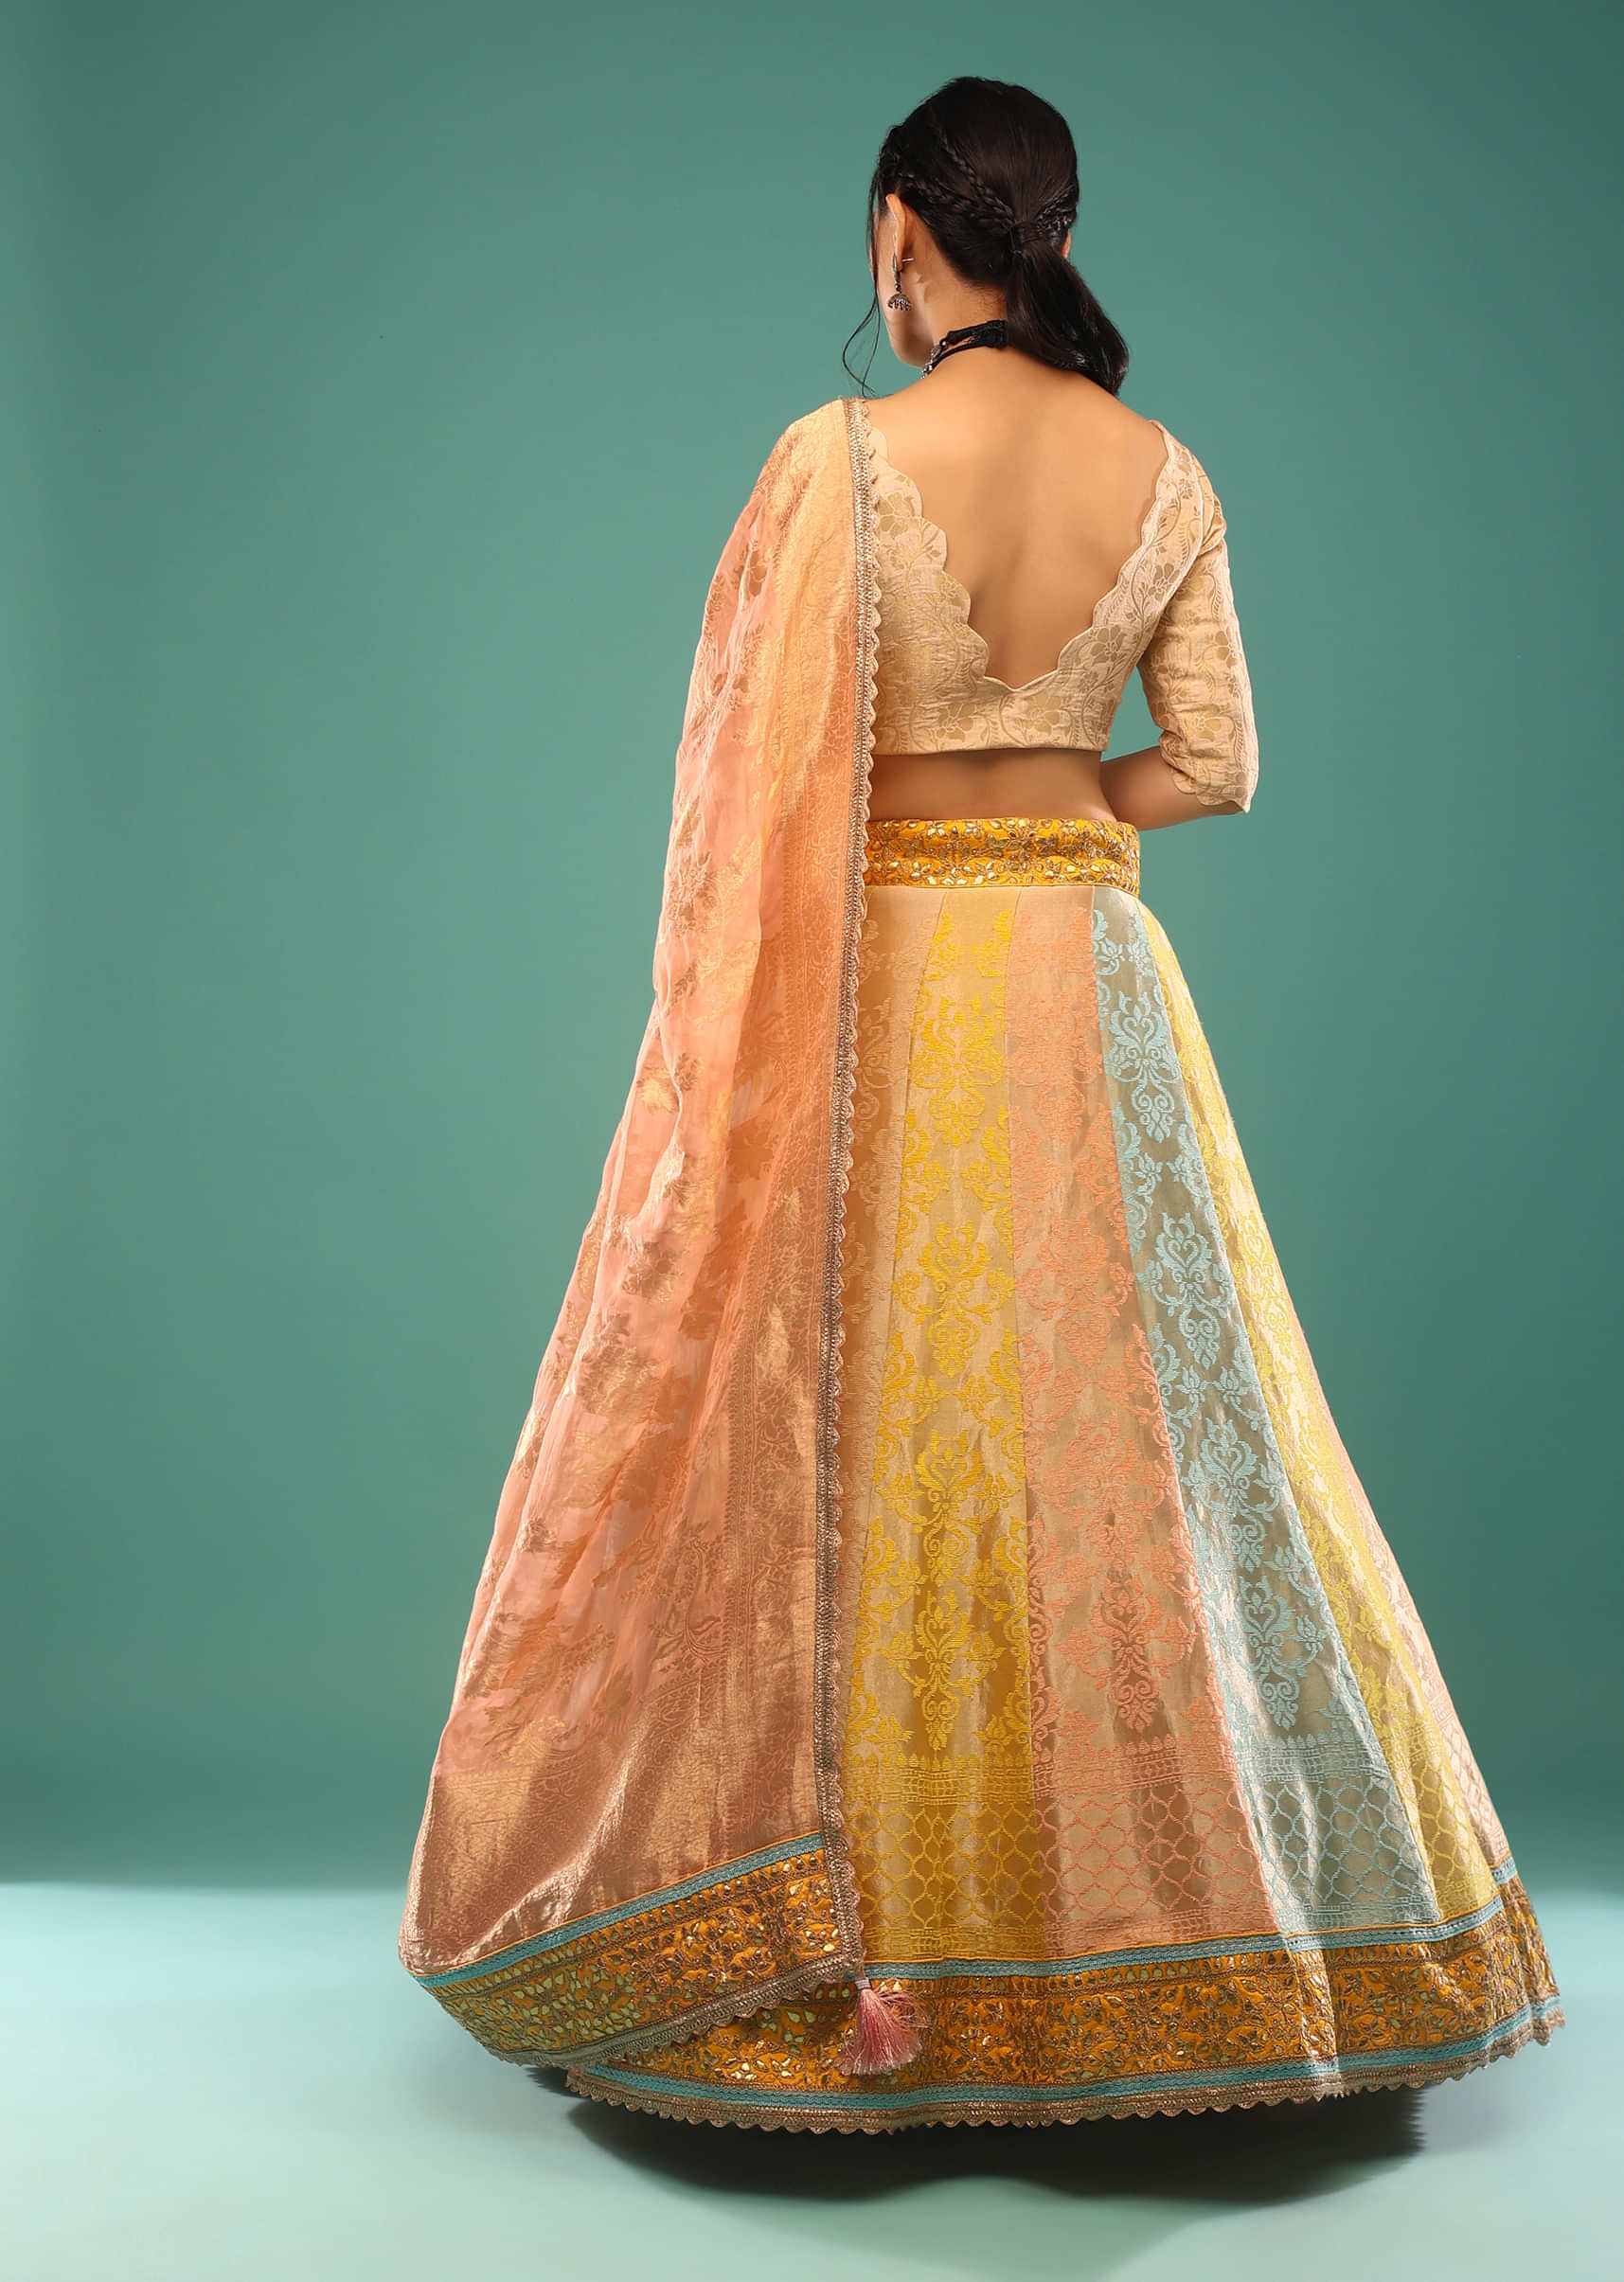 Multi-Colored Brocade Lehenga In Gotta Patti Embroidery,Paired With The Choli And Dupatta In Gotta Patti And Moti Embroidery